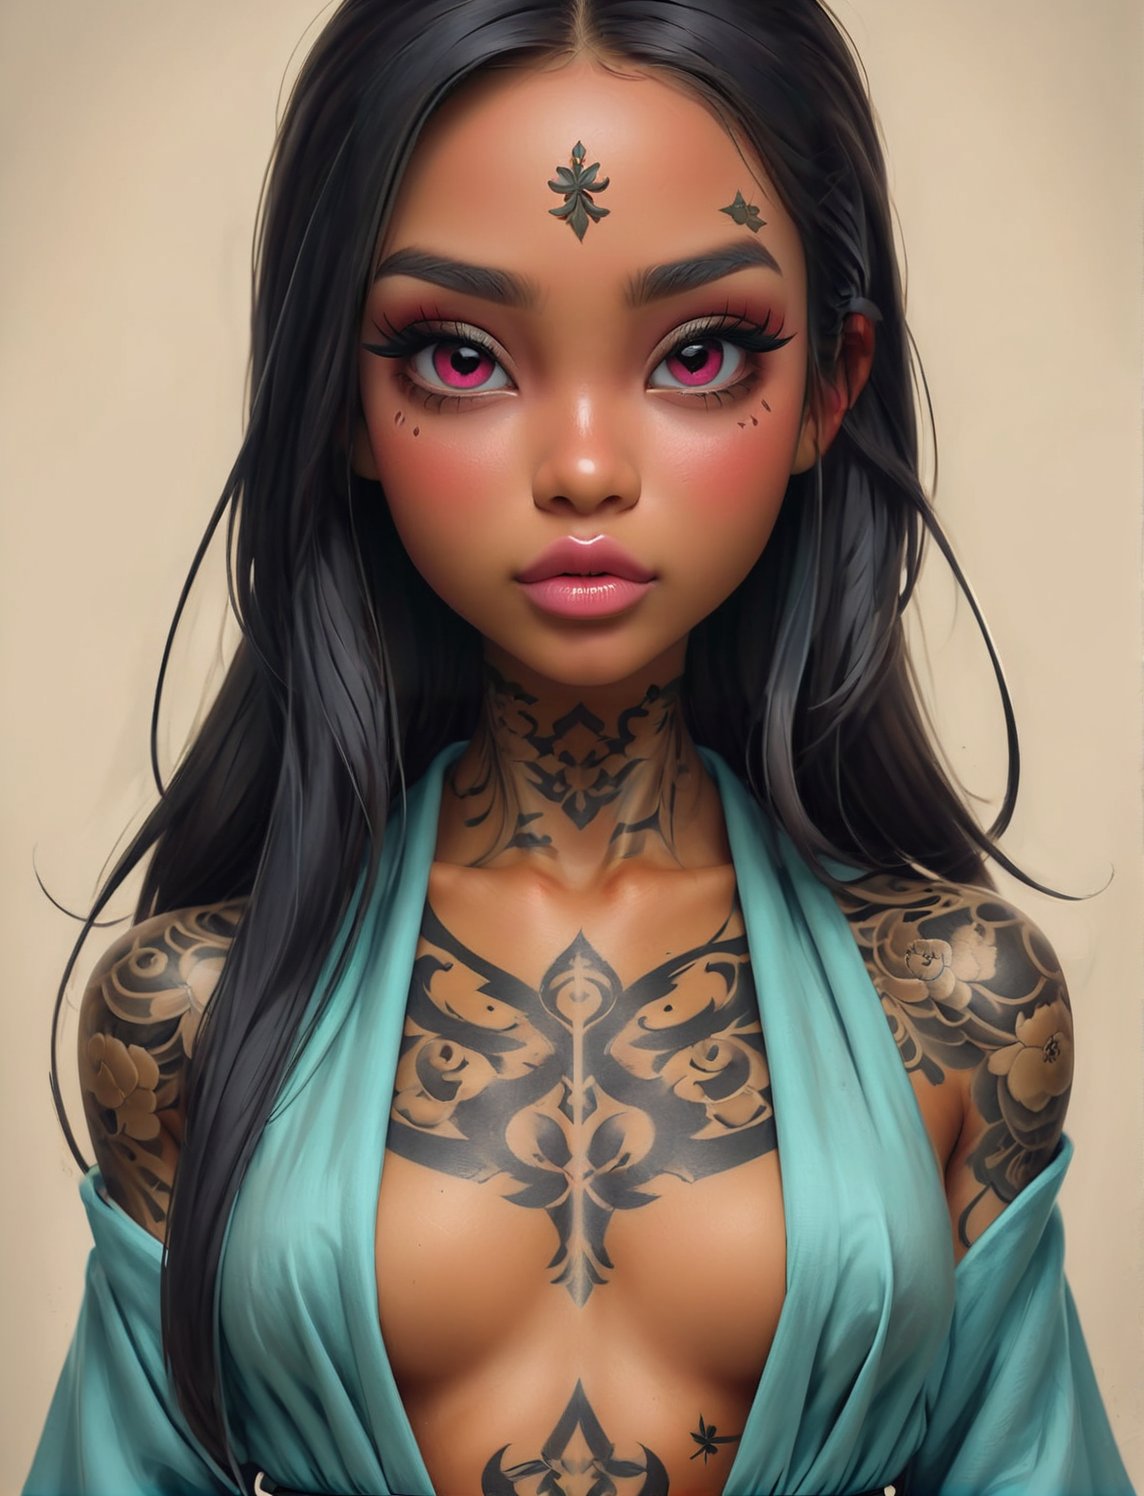 tattoo design, stencil, tanned skin,beautiful young female, long dark hair, symmetrical facial features, Japanese, partially clothed in robe, by William-Adolphe Bouguerea and artgerm